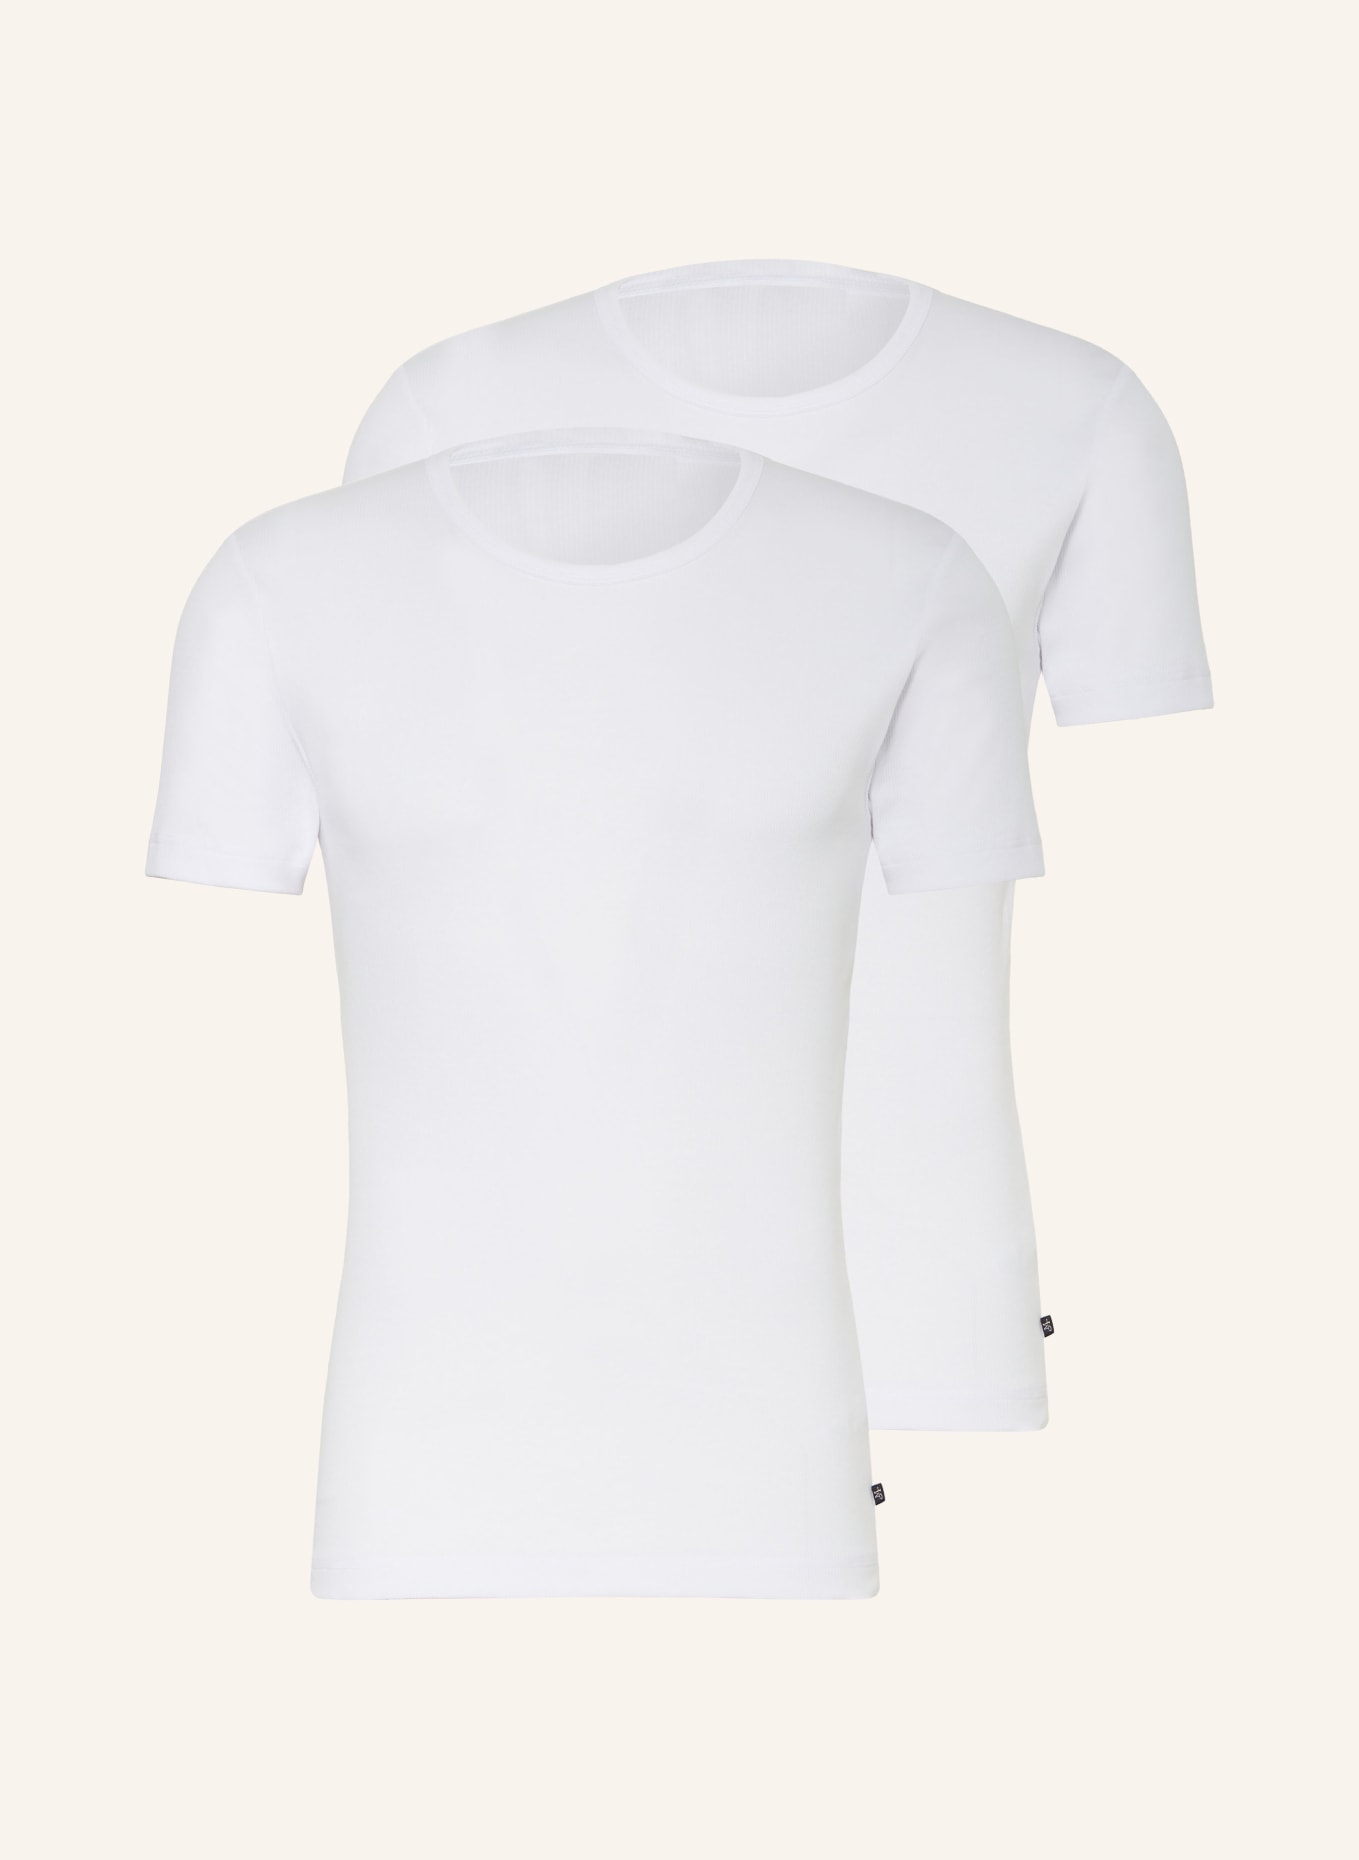 Marc O'Polo 2er-Pack T-Shirts, Farbe: WEISS (Bild 1)